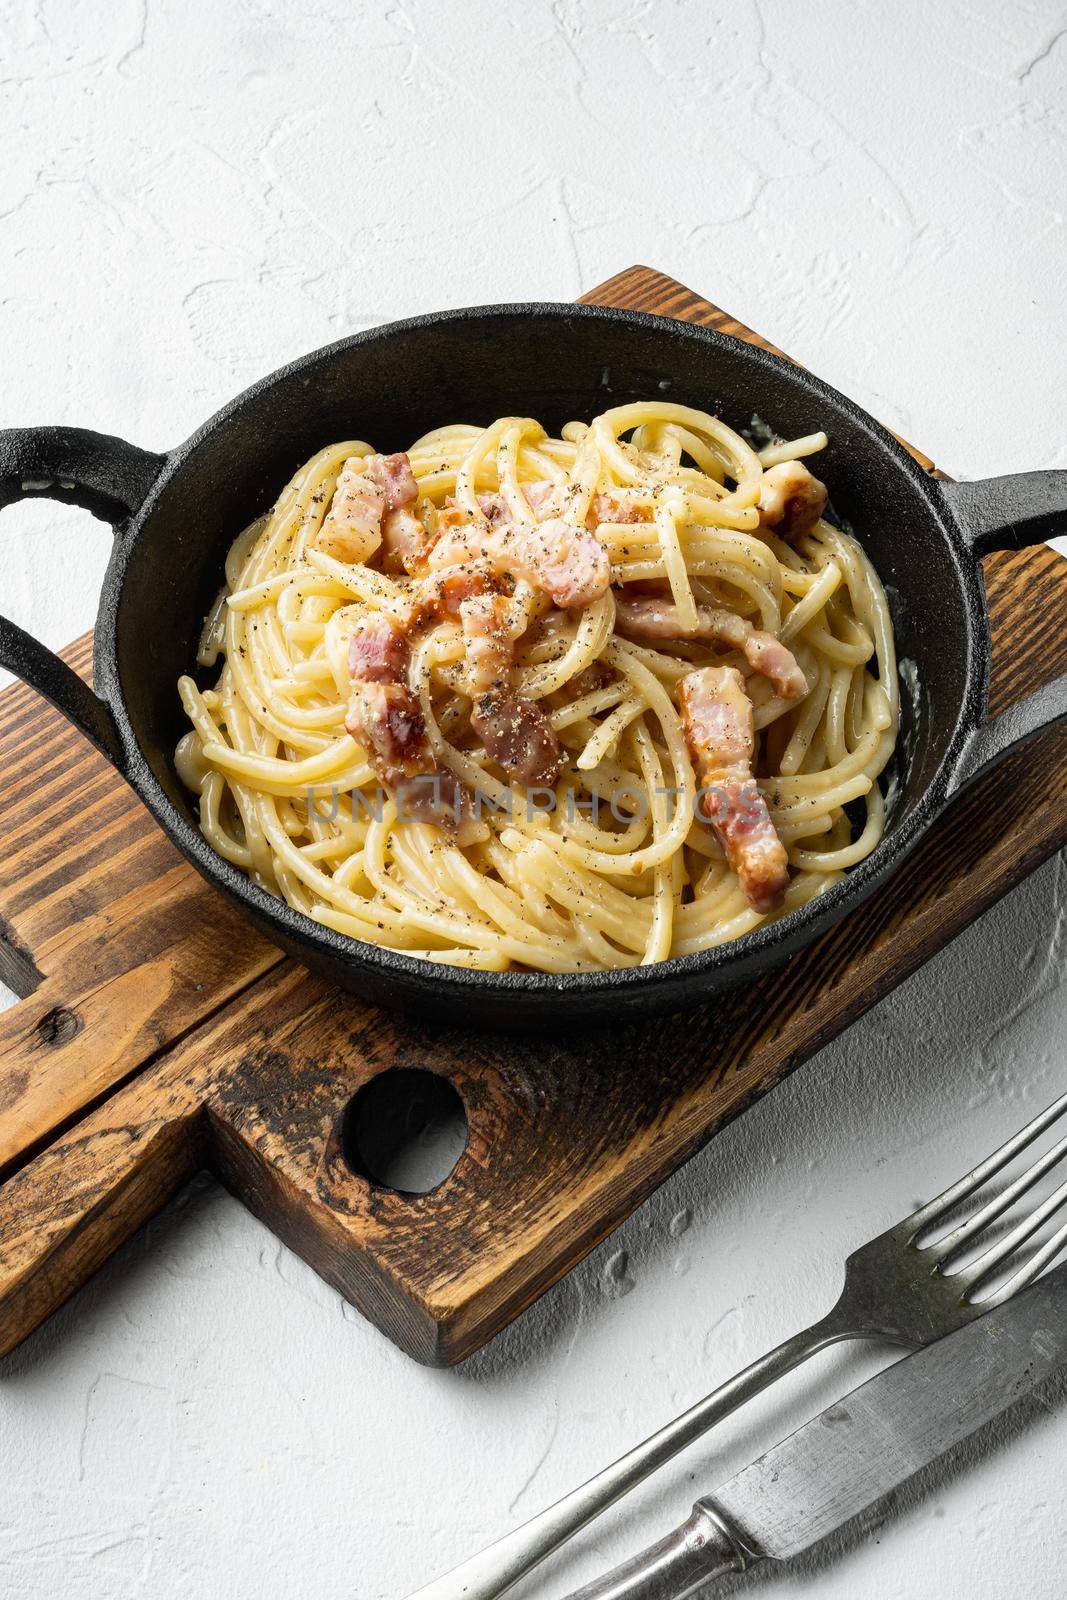 Classic Homemade Pasta carbonara Italian with Bacon, eggs, Parmesan Cheese, in cast iron frying pan, on white stone surface by Ilianesolenyi